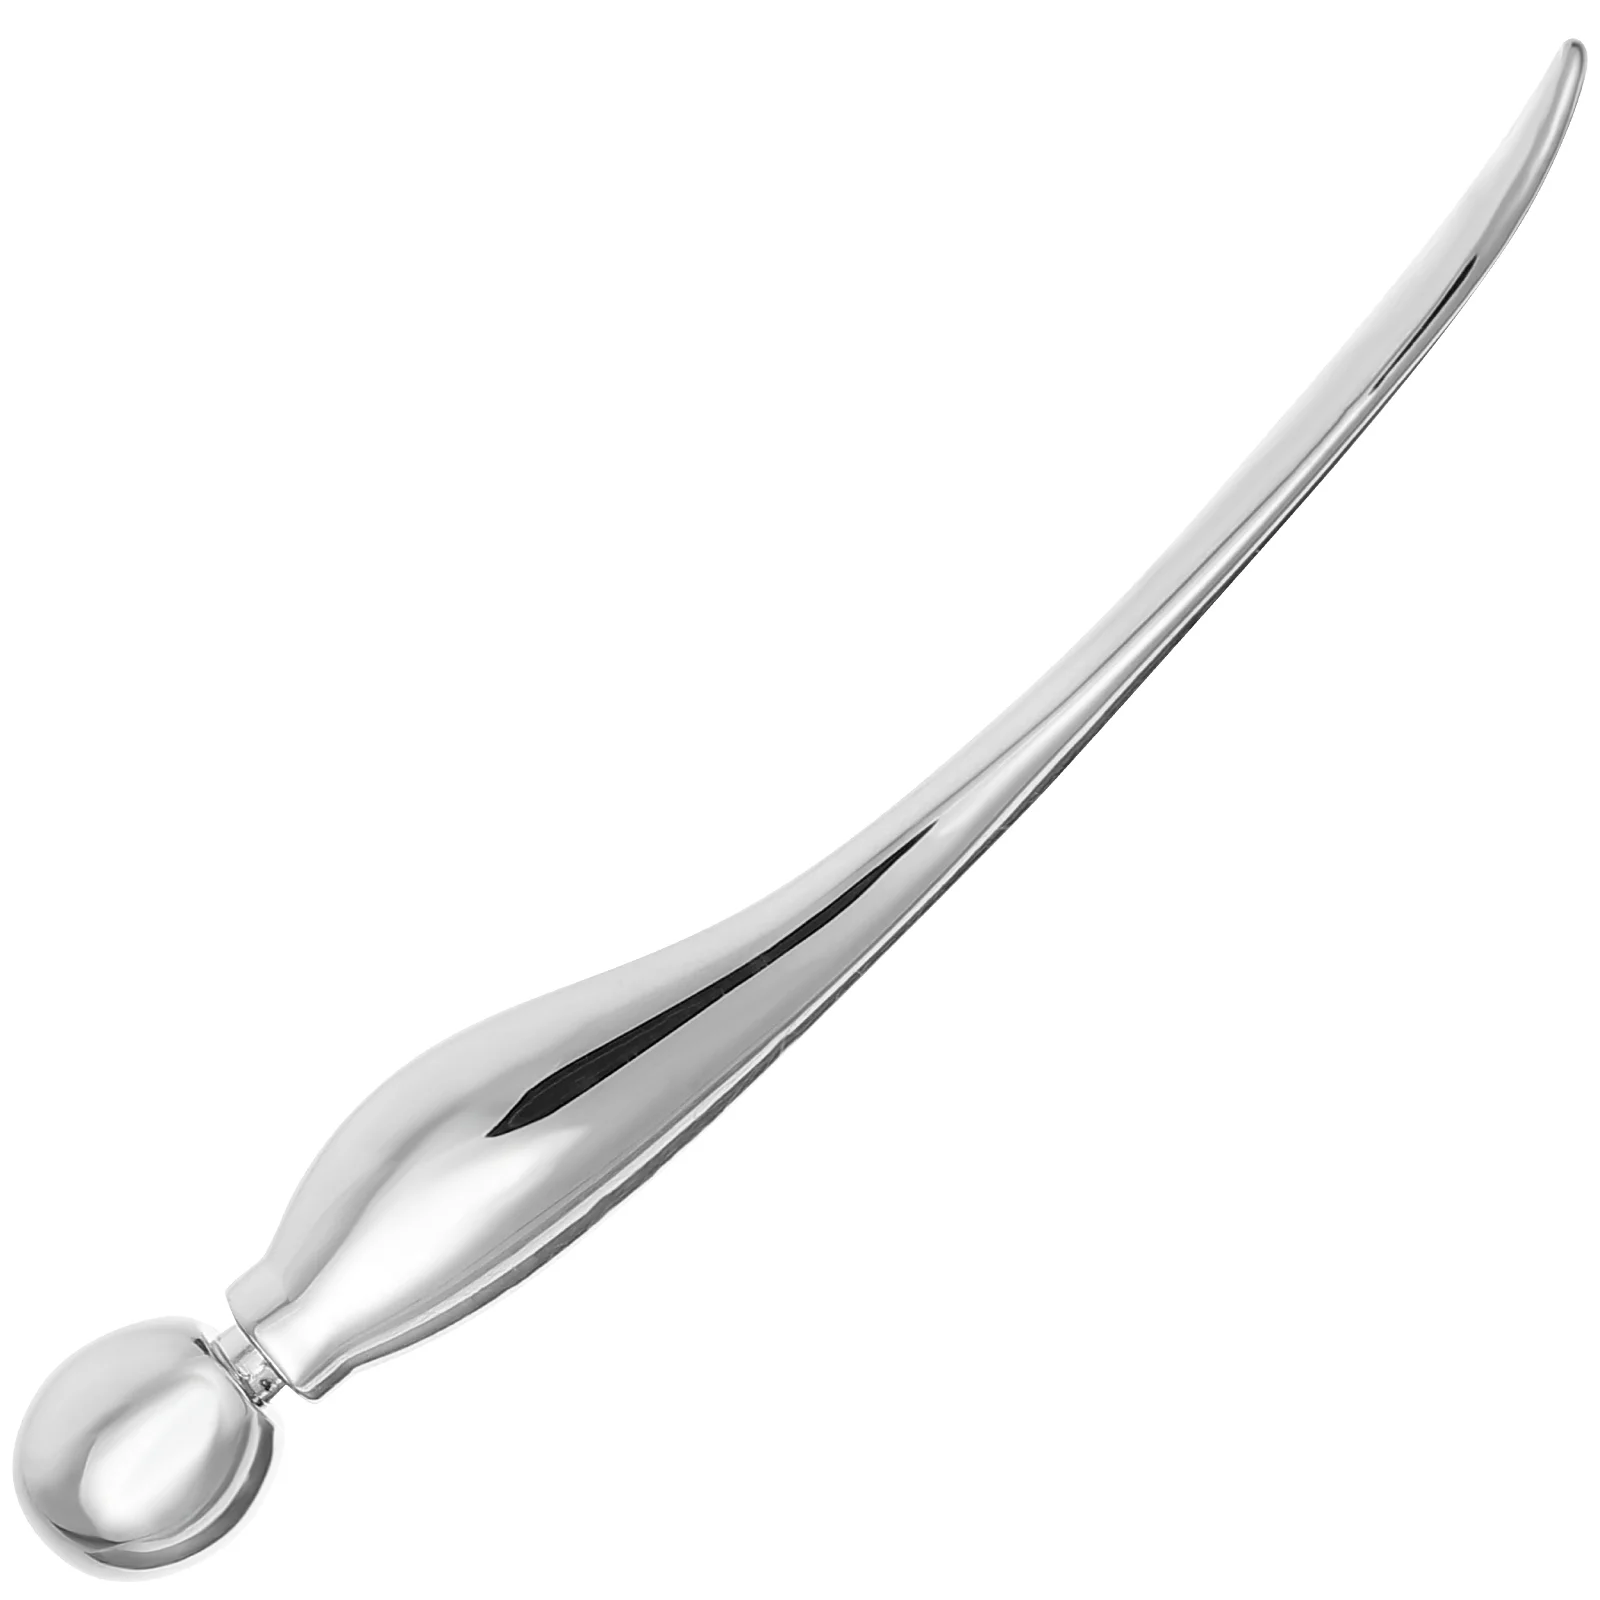 

Eye Applicator Makeup Spoon Two In One Tools For Reduce Puffiness And Wrinkles